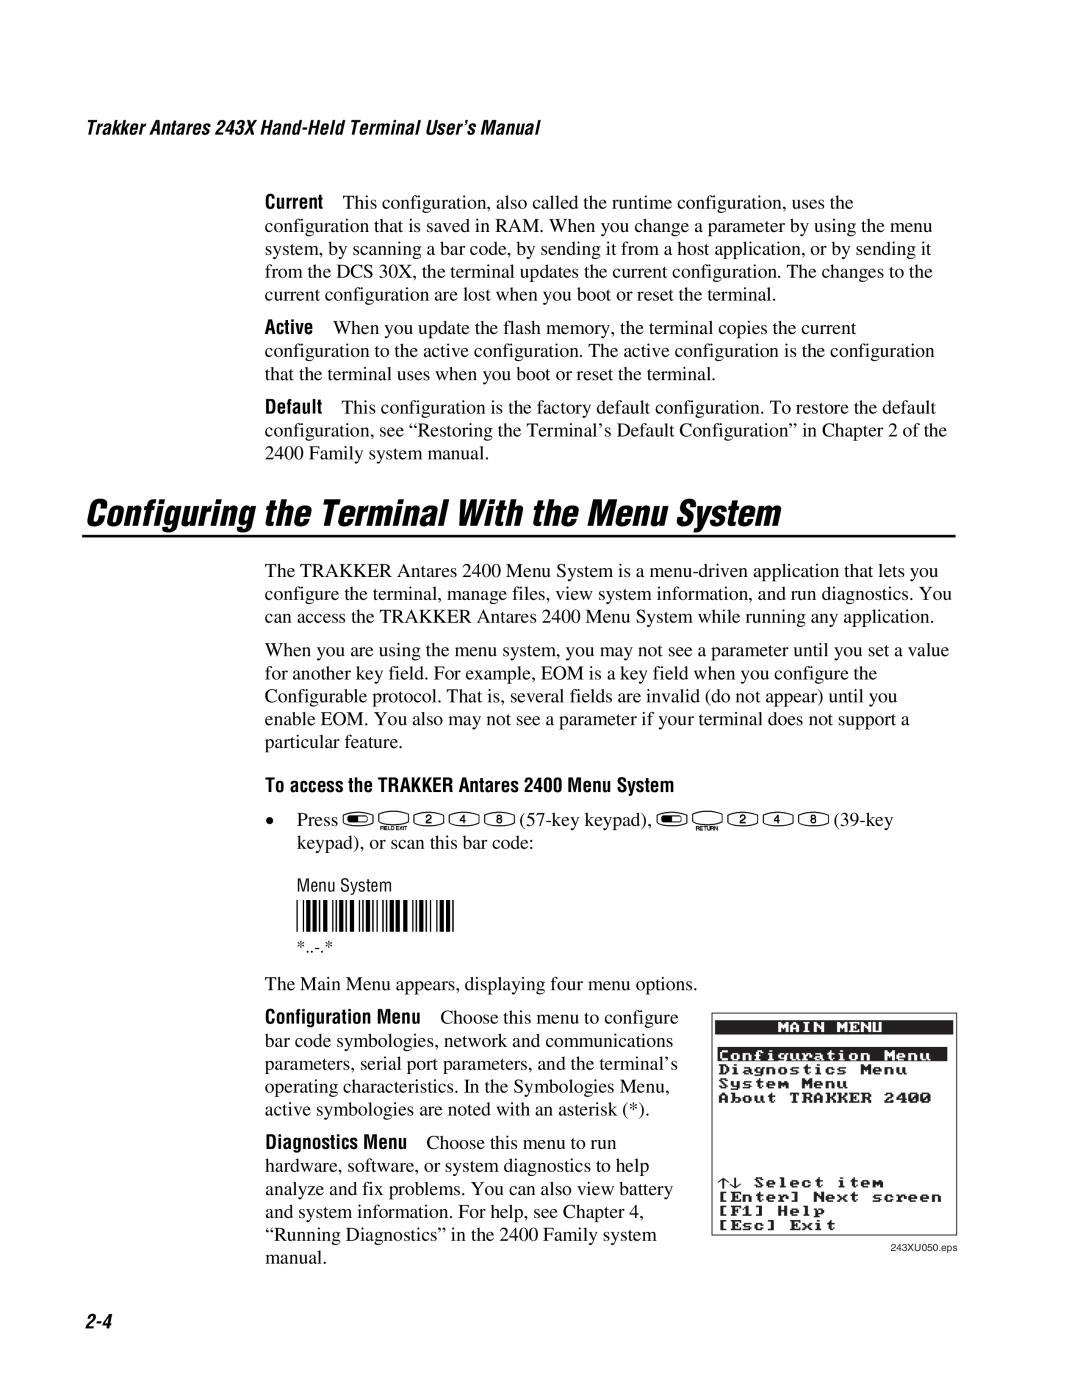 IBM 243X user manual Configuring the Terminal With the Menu System, To access the RAKKER Antares 2400 Menu System 